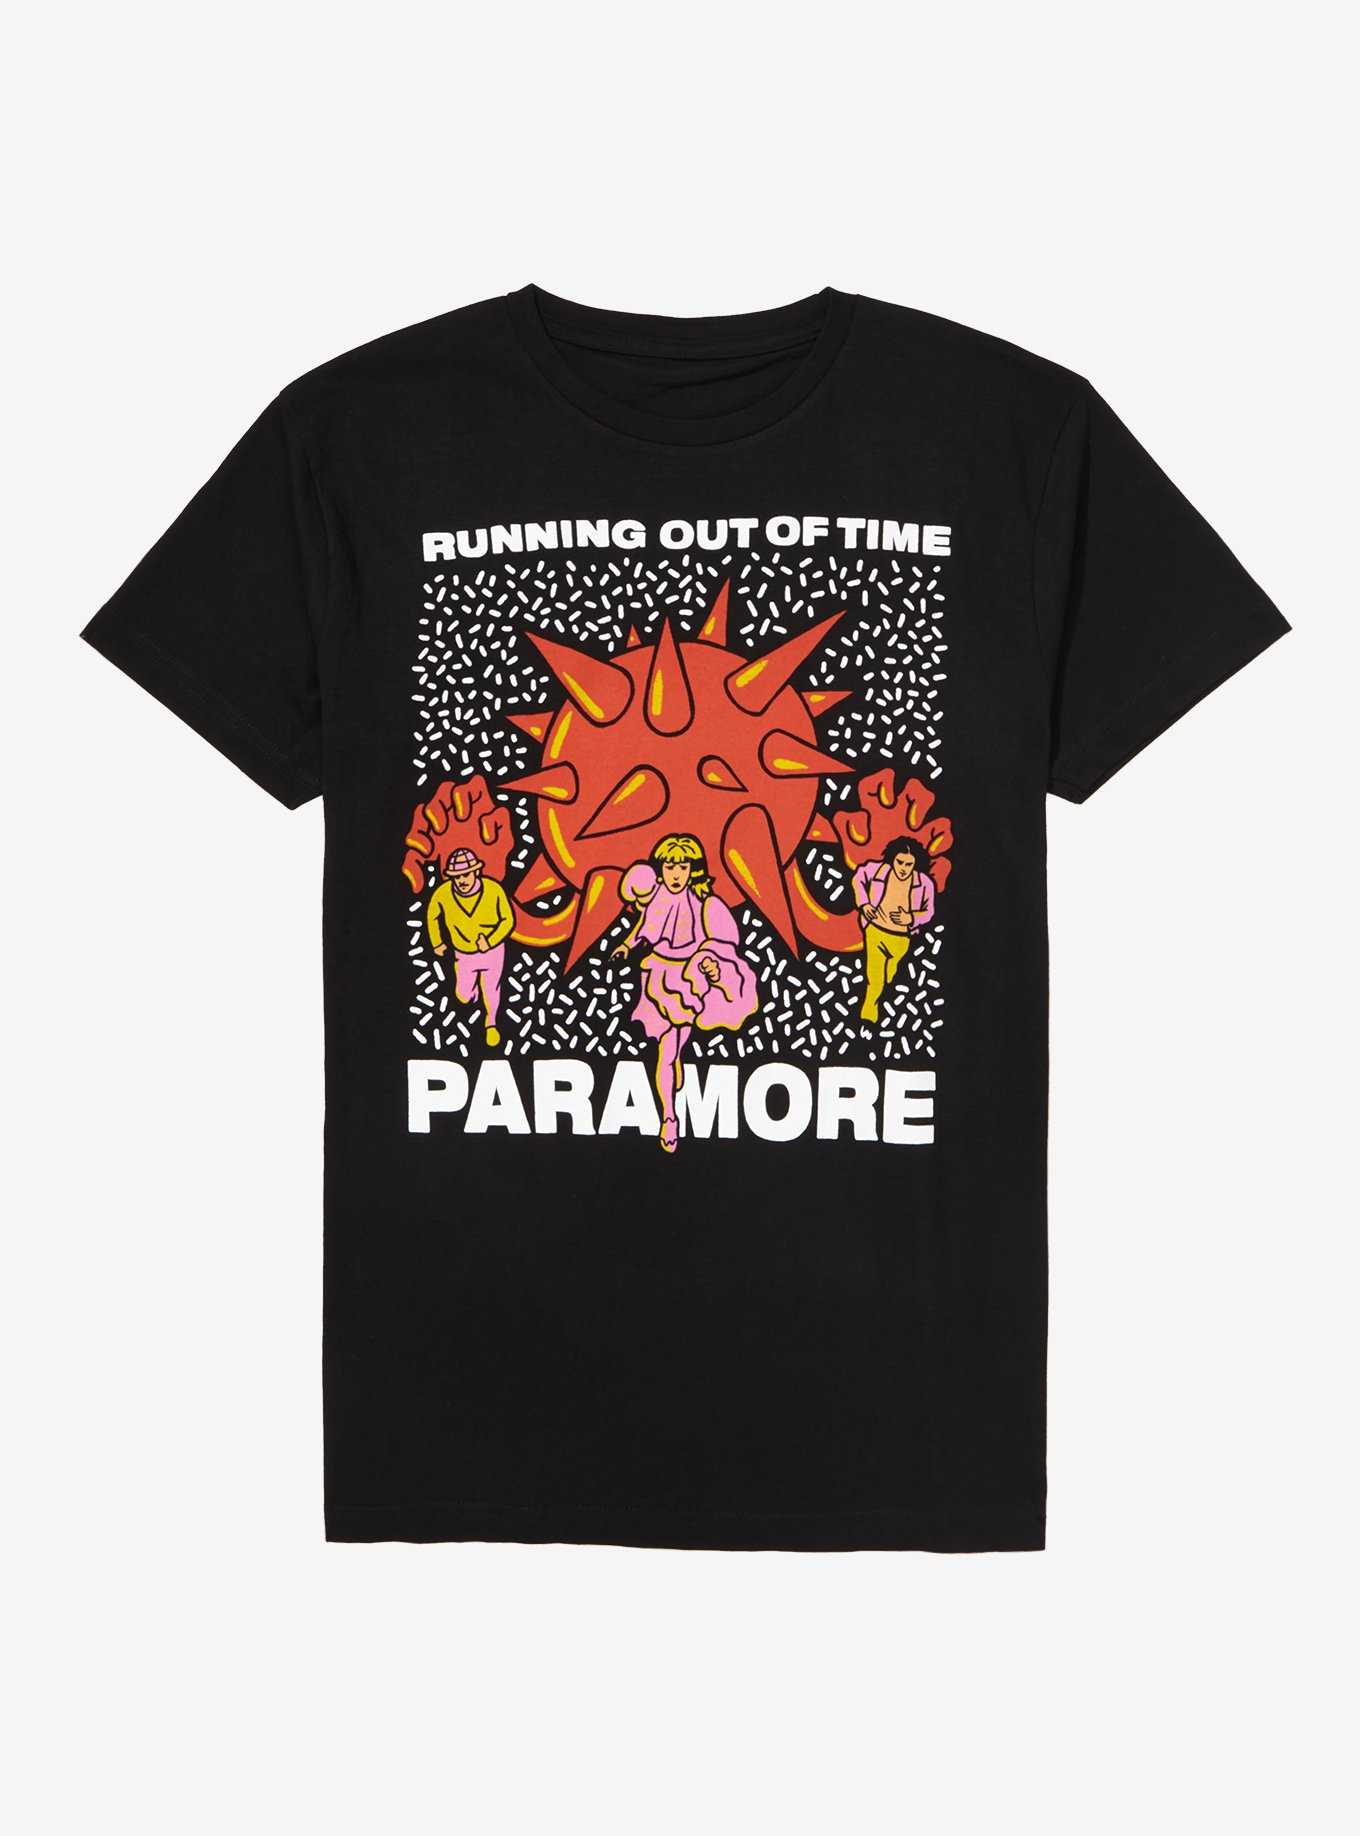 Brand New Eyes, Paramore Band T-shirt - Print your thoughts. Tell your  stories.